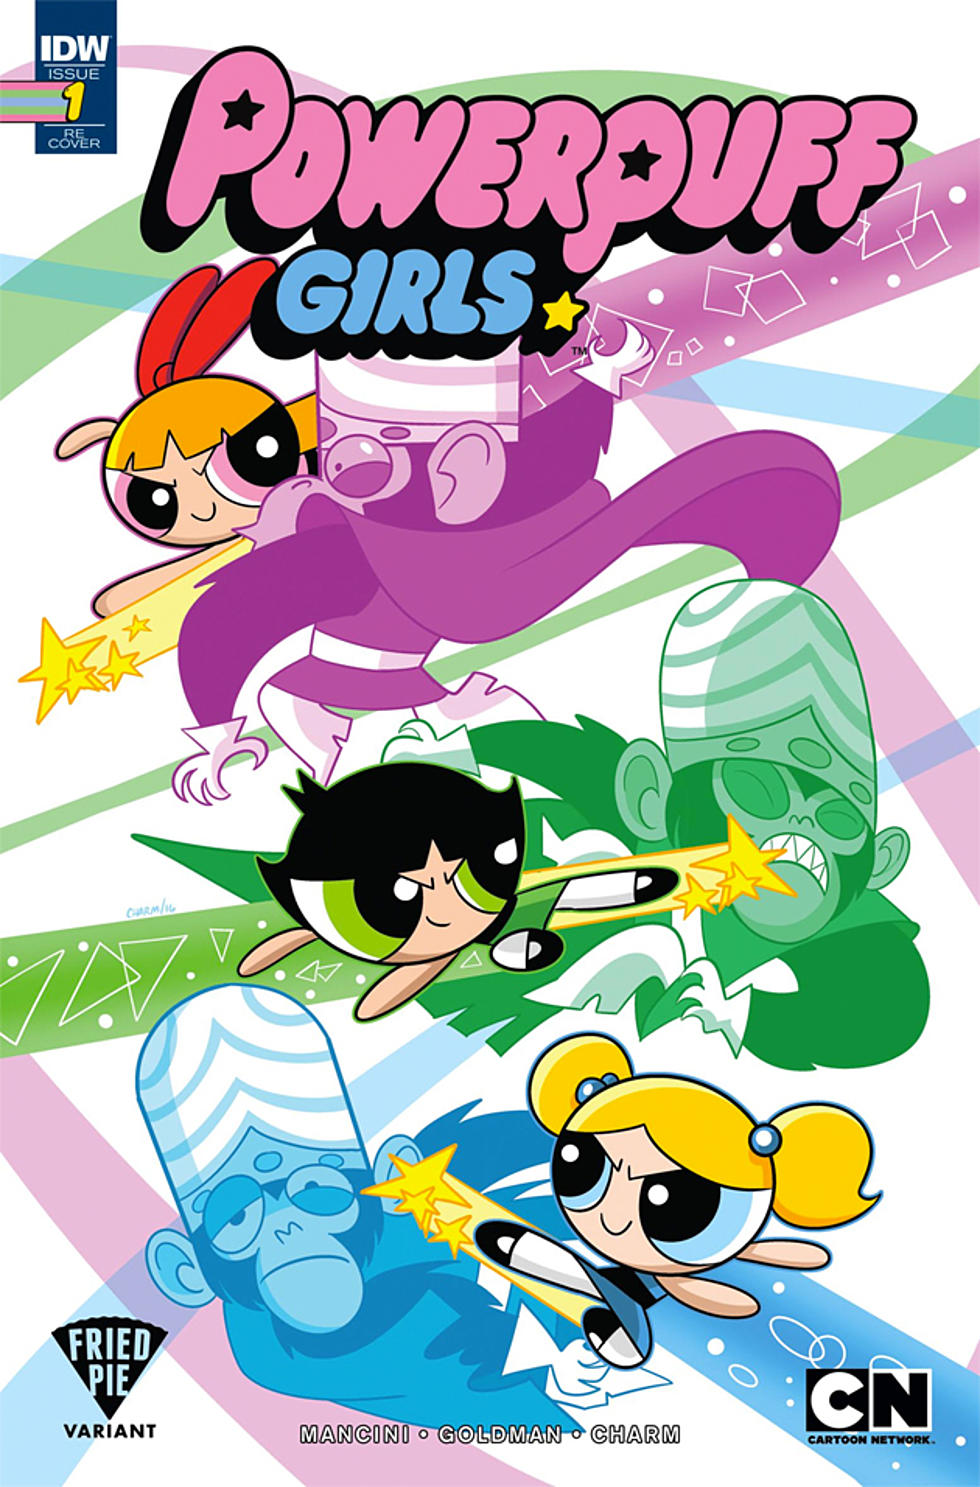 Derek Charm Draws The Redesigned Powerpuff Girls For An Exclusive Variant Cover